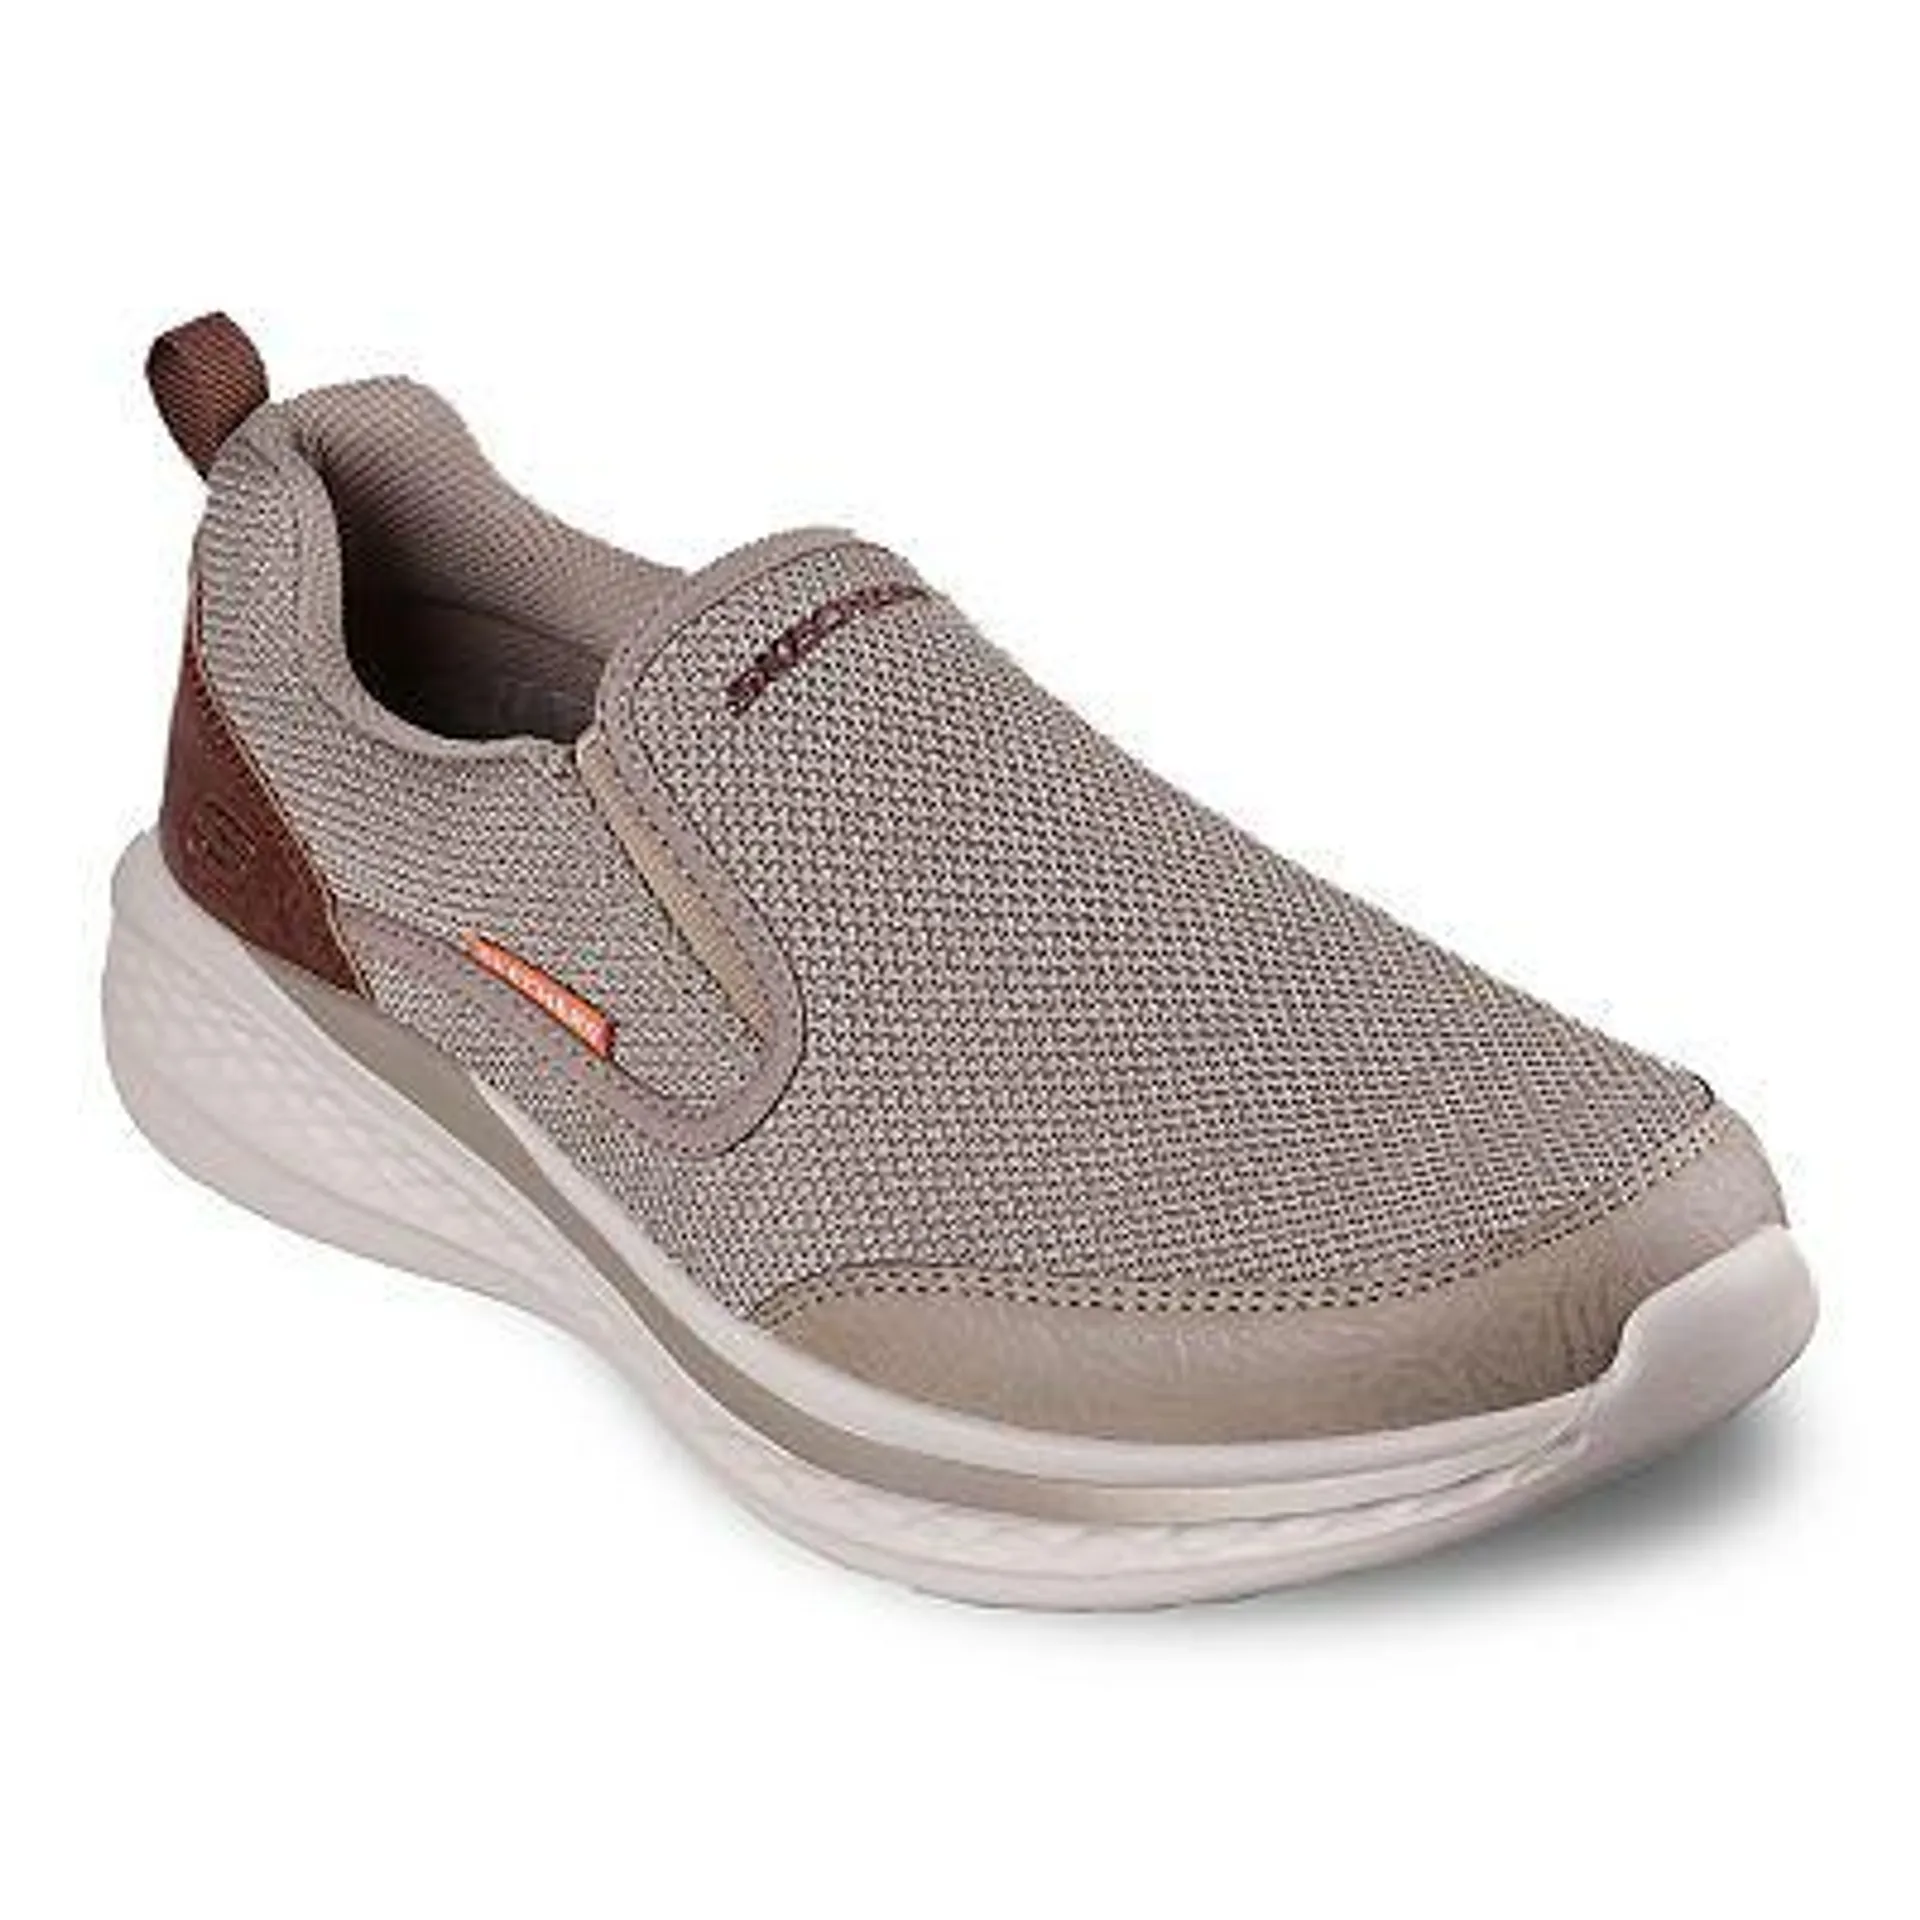 Skechers Relaxed Fit® Slade Lucan Men's Pull-on Shoes